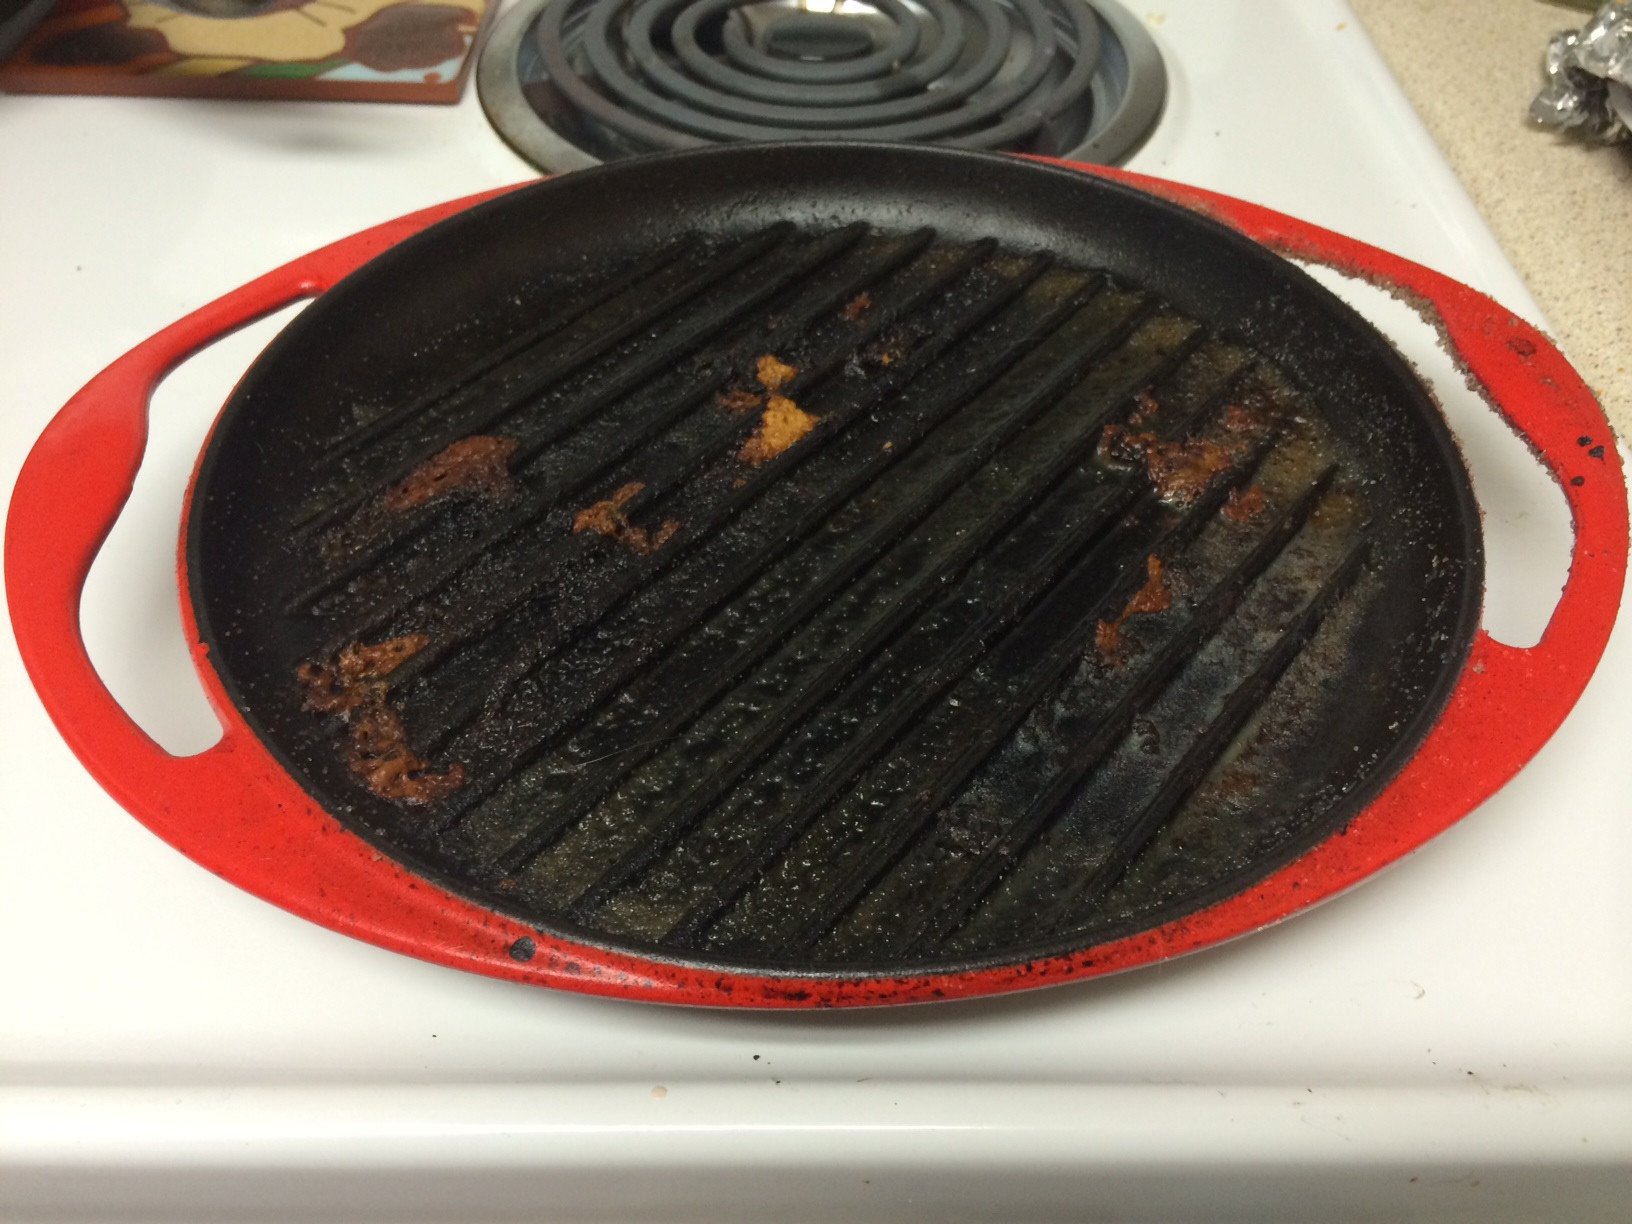 Dirty Le Creuset grilling pan